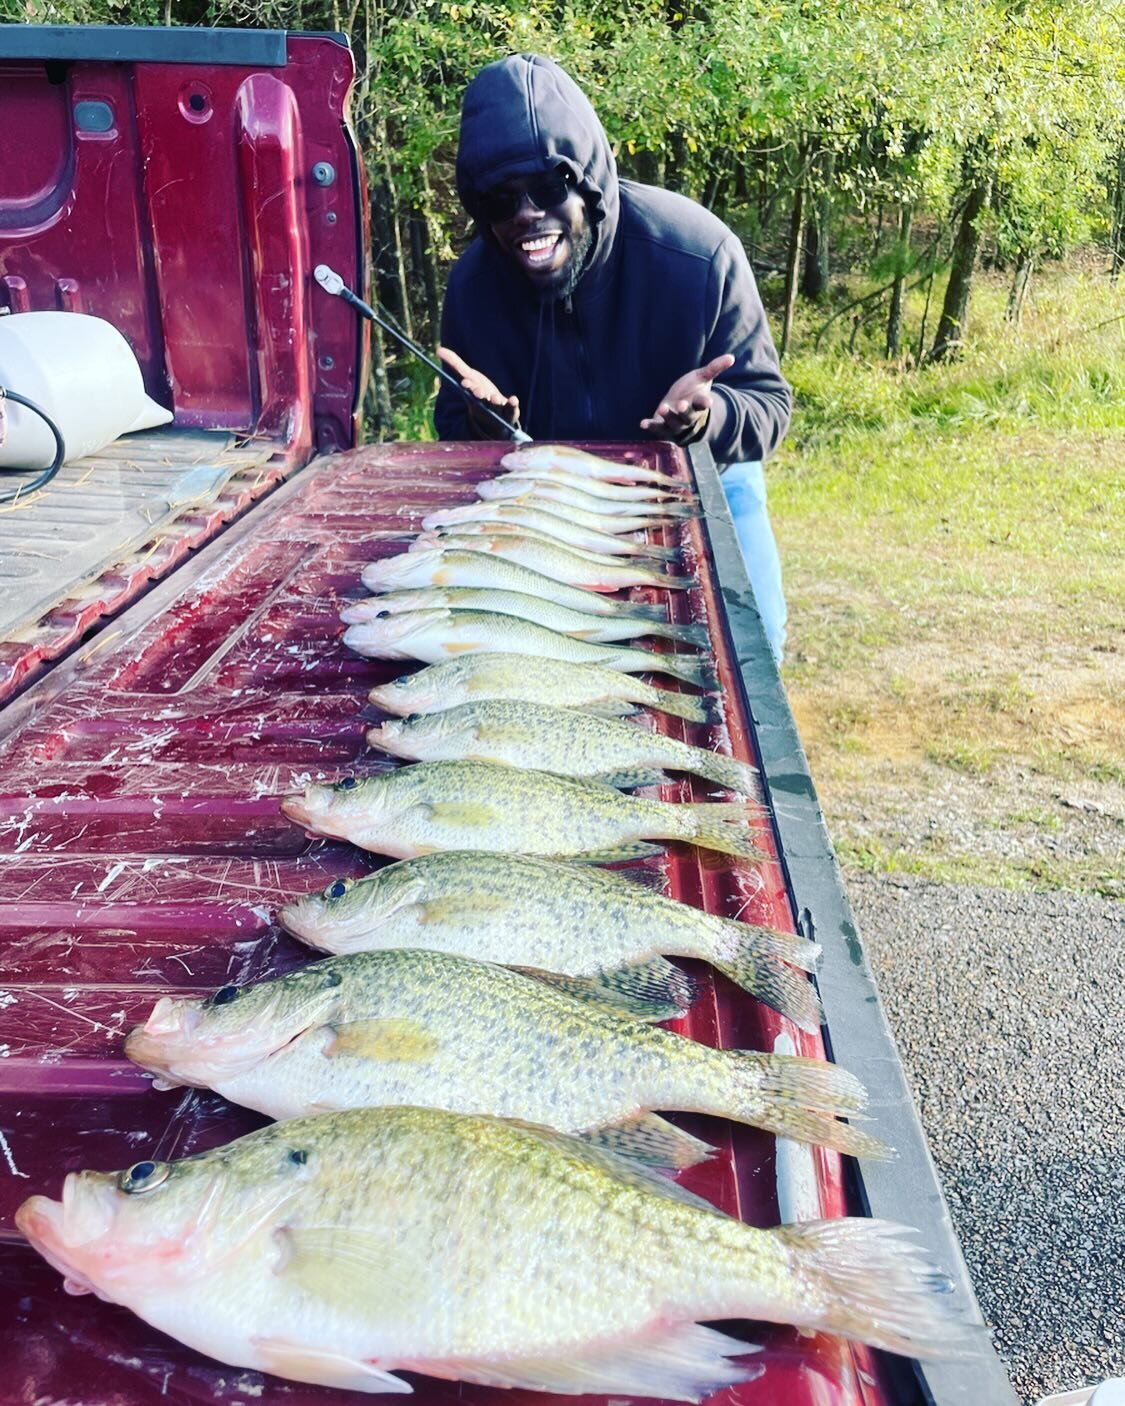 The wind at Sardis today blew us all the way to Pontotoc! #bartonoutfitters #littleqranch #enidlakecharters #weareoutdoorpeople #franklinfishingtours #jigsbyjay